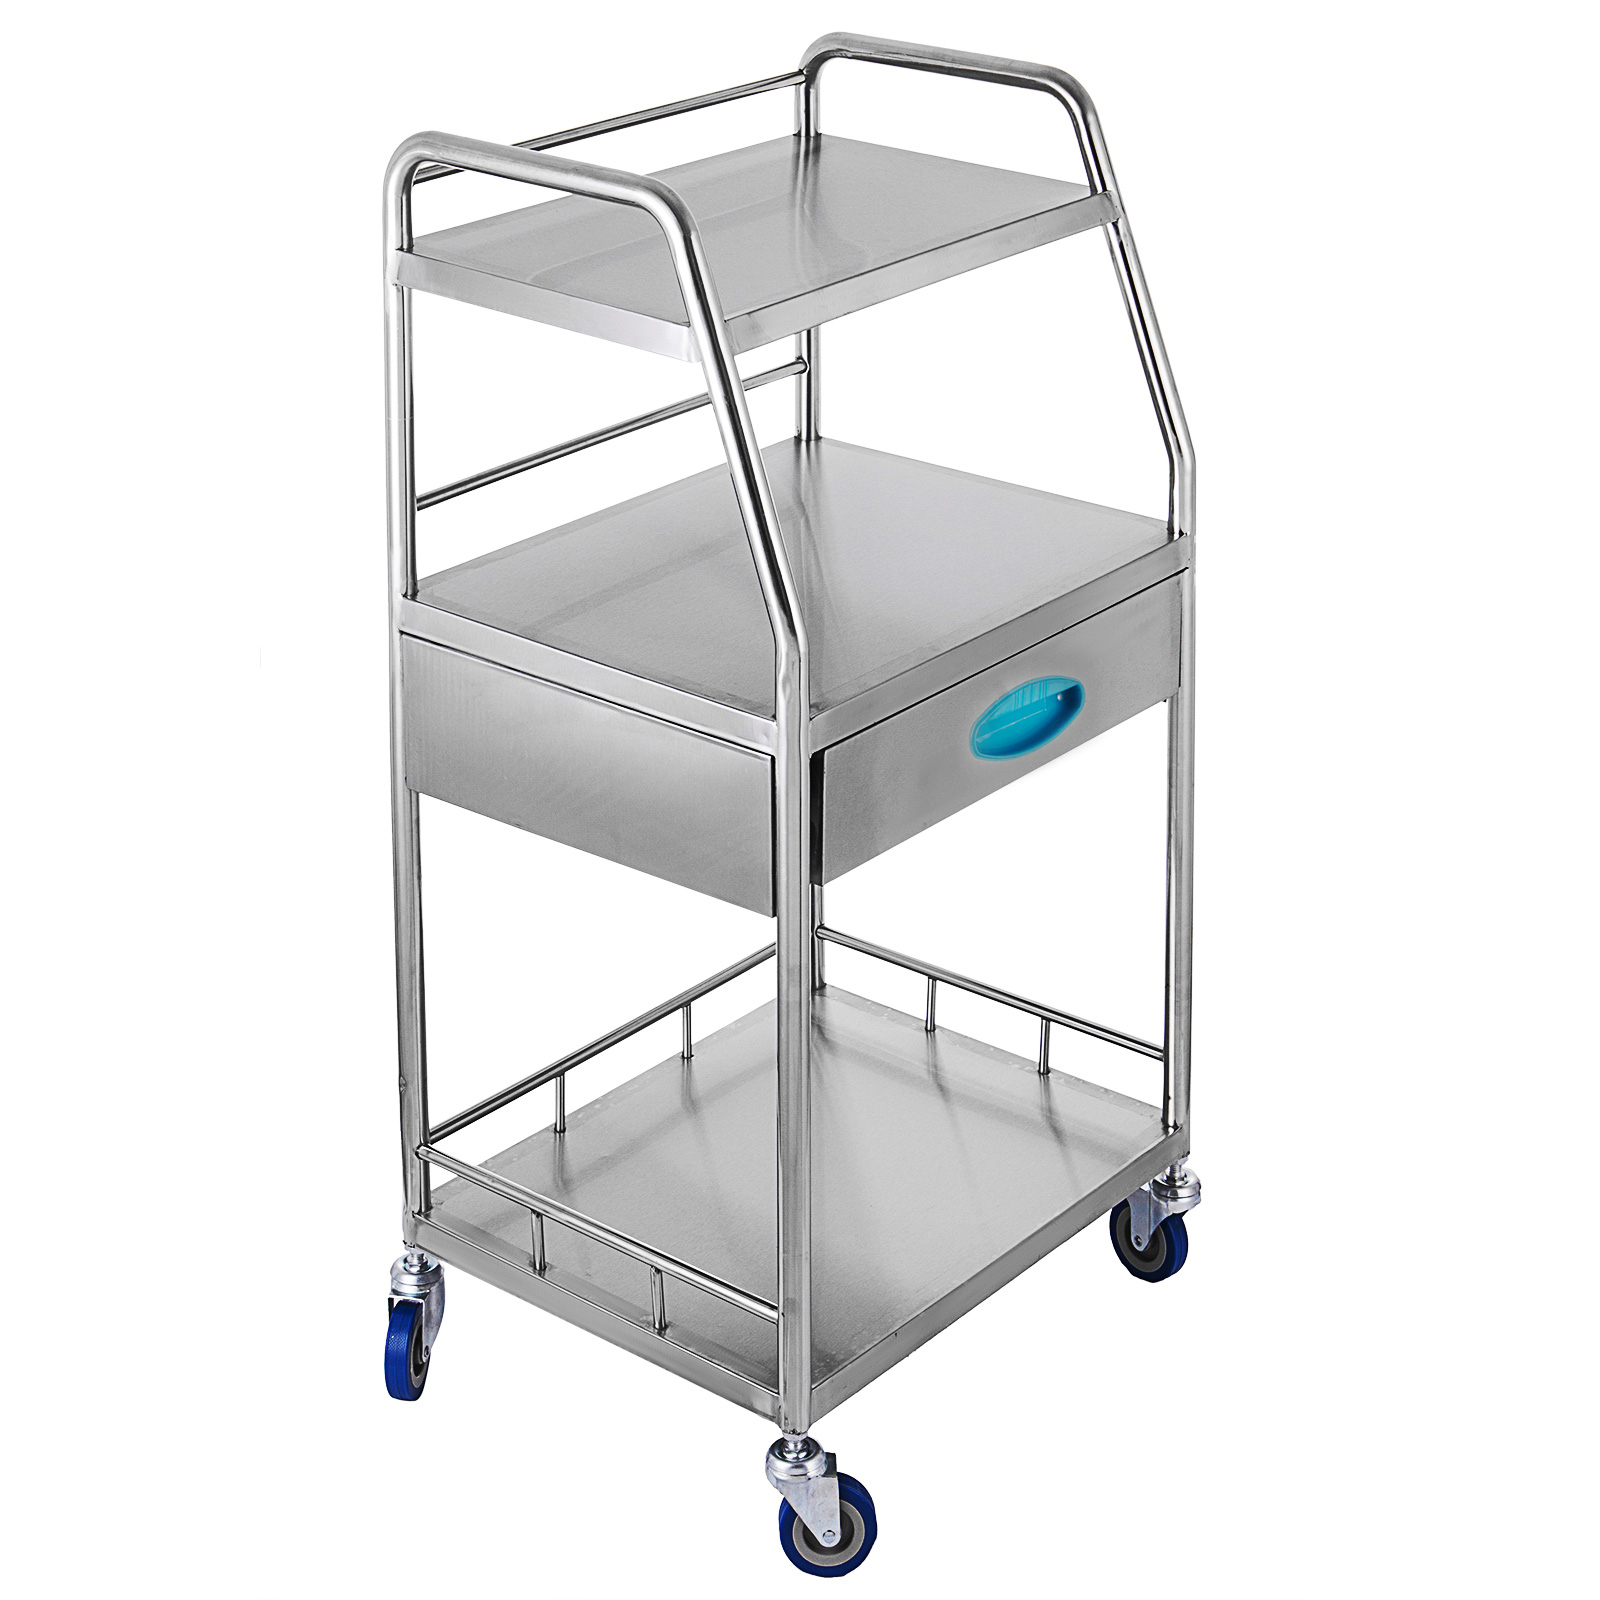 Four Sizes Lsak Standing Shelf Units KKYY Medical Trolley Cart Dental Lab Cart 3 Layers Stainless Steel Lab Trolley Medical Hospital Equipment Portable Serving Trolley On Wheels 